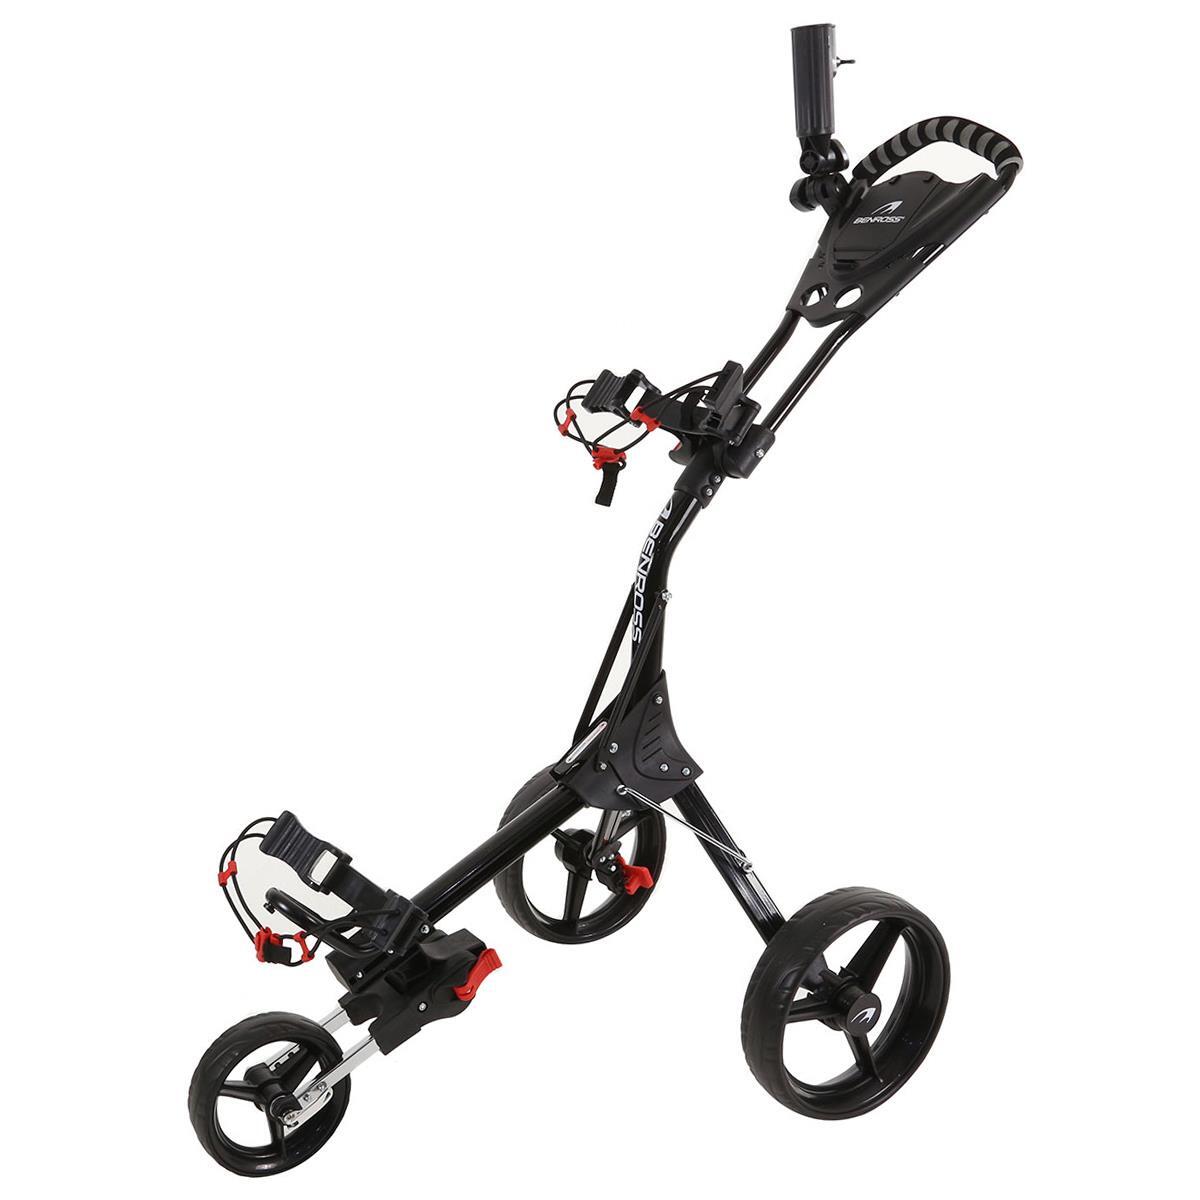 BENROSS Benross Pro Compact Trolley UNISEX ONE SIZE BLACK